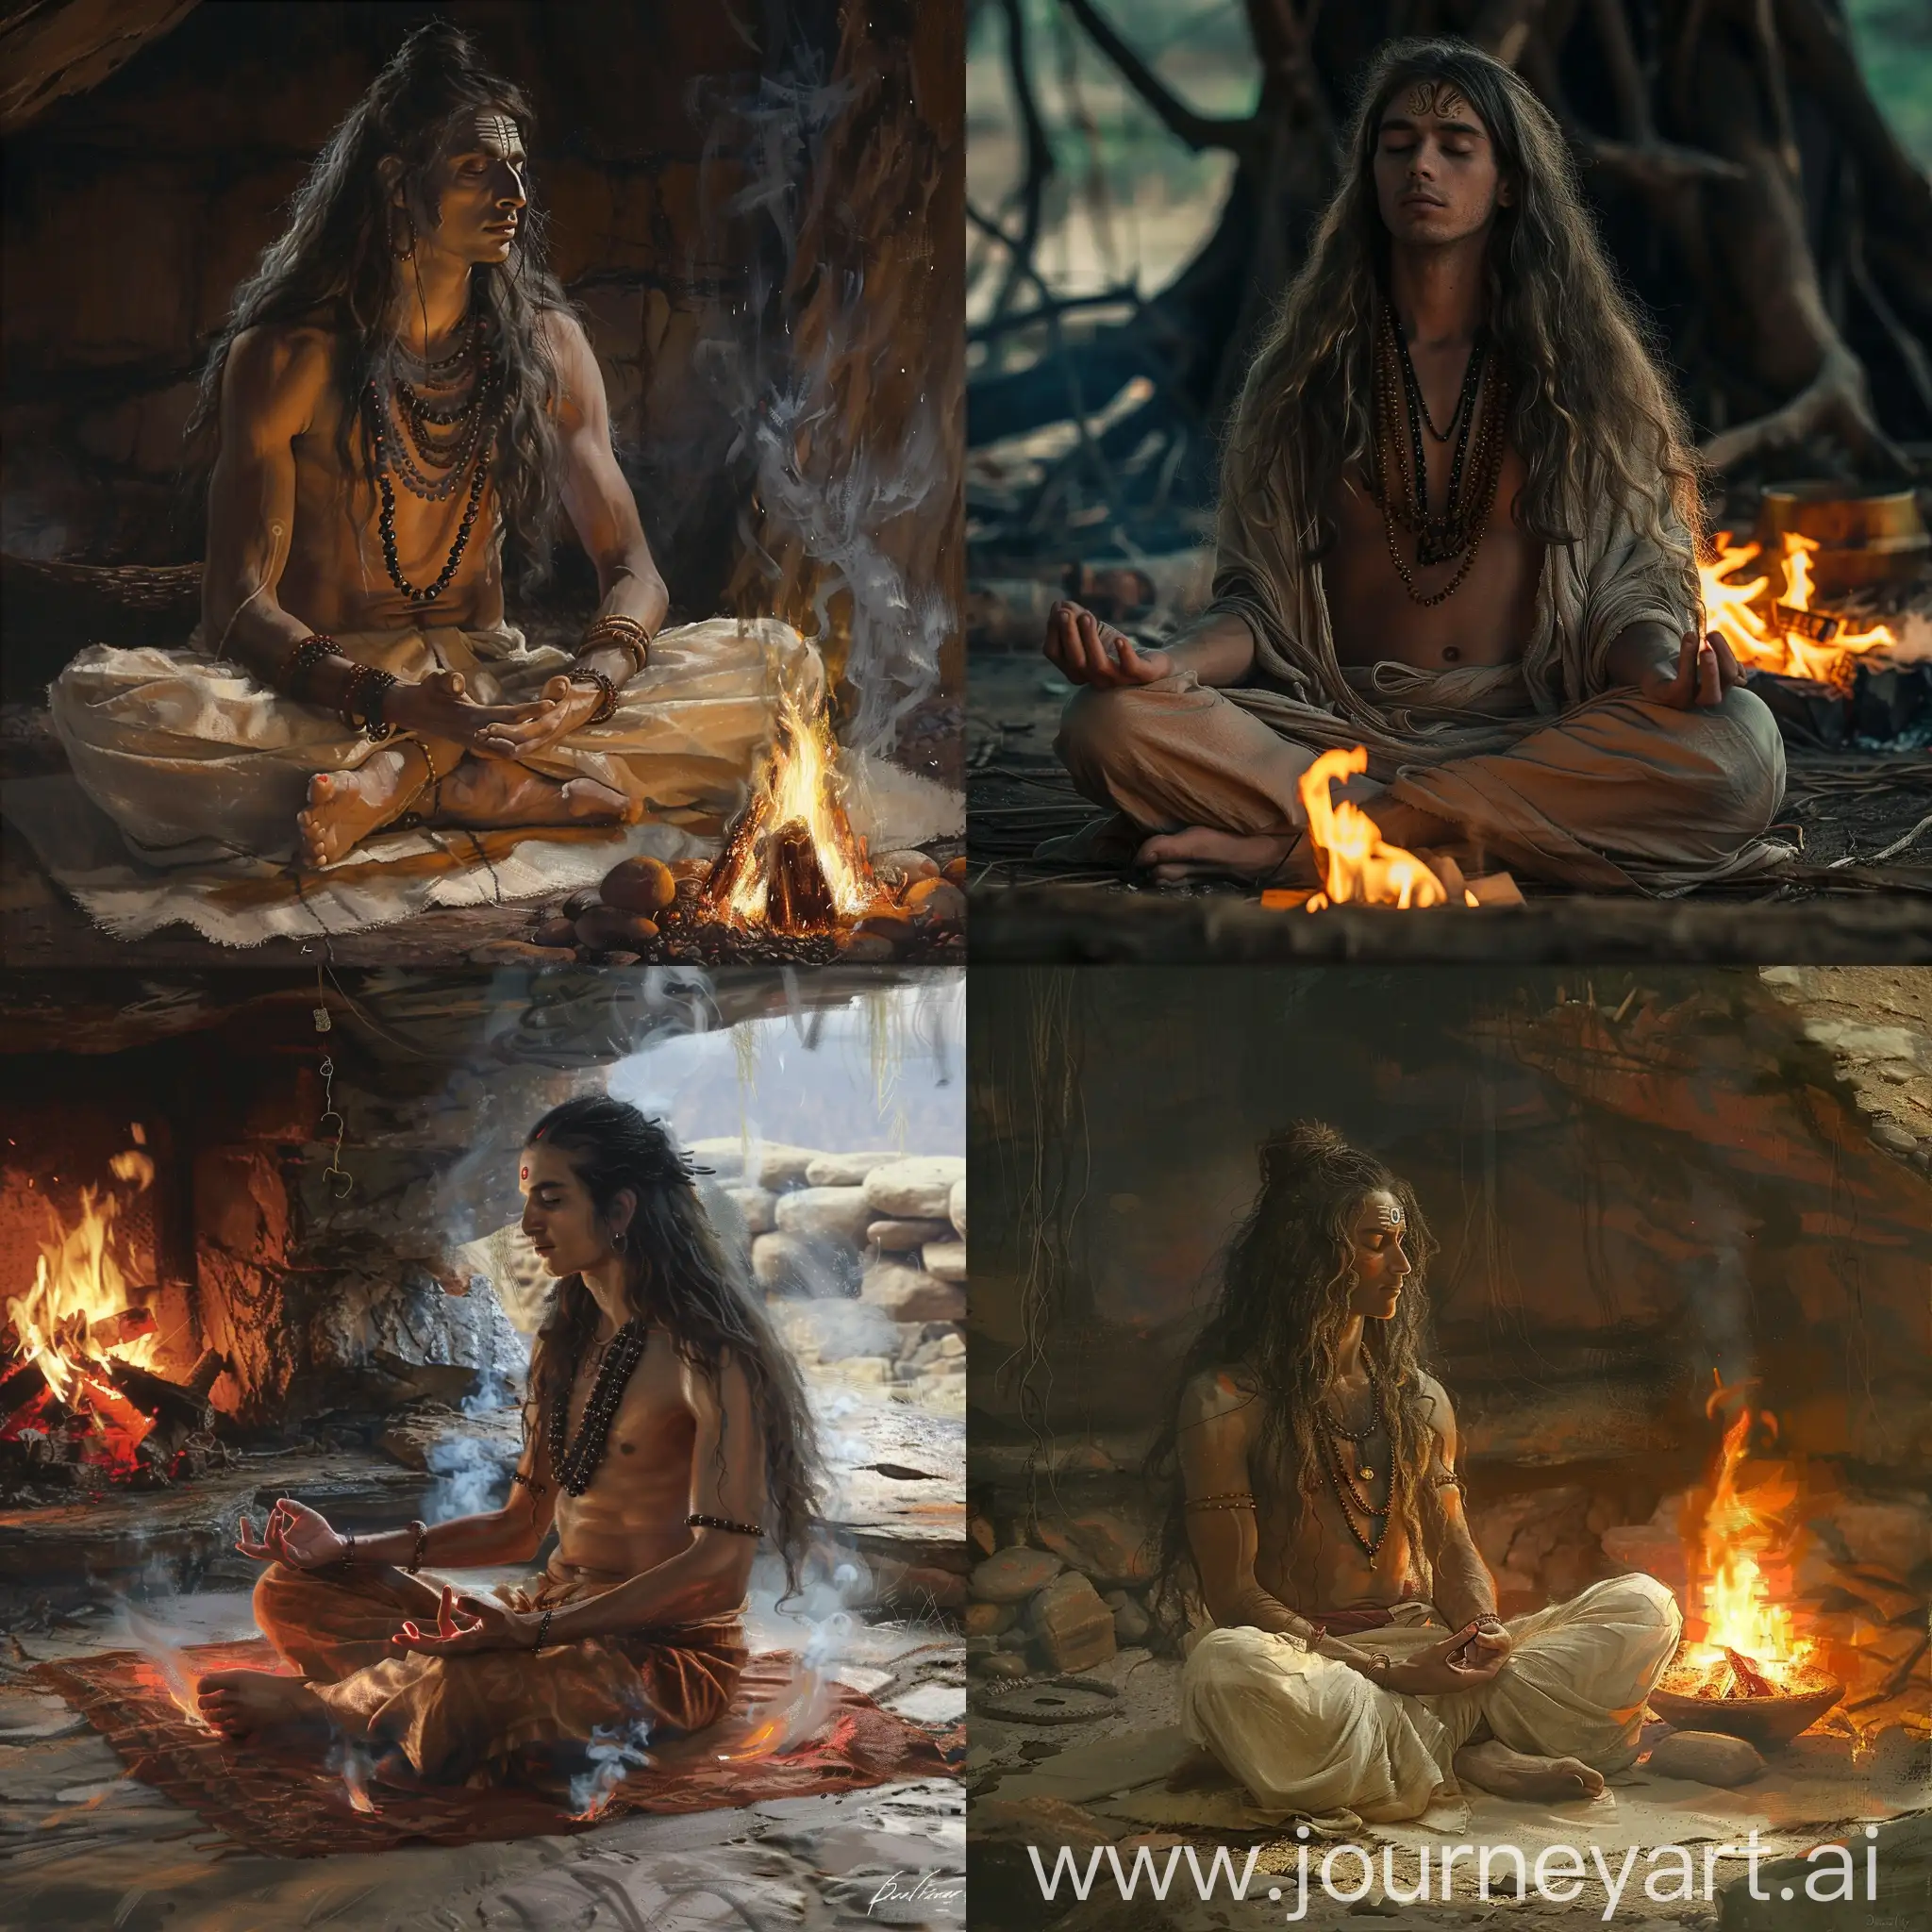 shaiva yogi with long hair and wearing rudraksha meditating in the hermit by the fire
